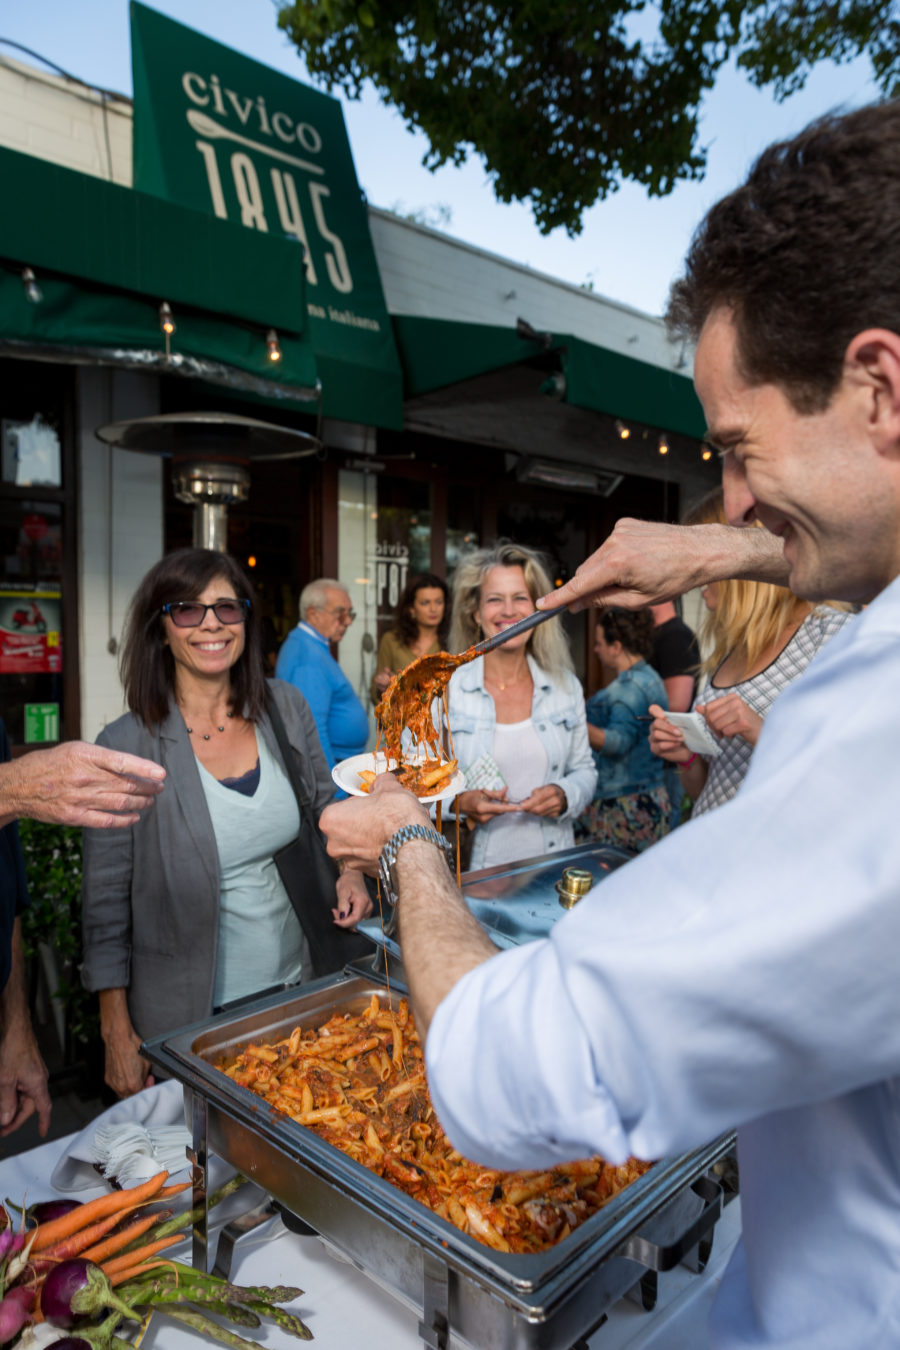 Get A Taste From Every Restaurant In Little Italy All In One Night!